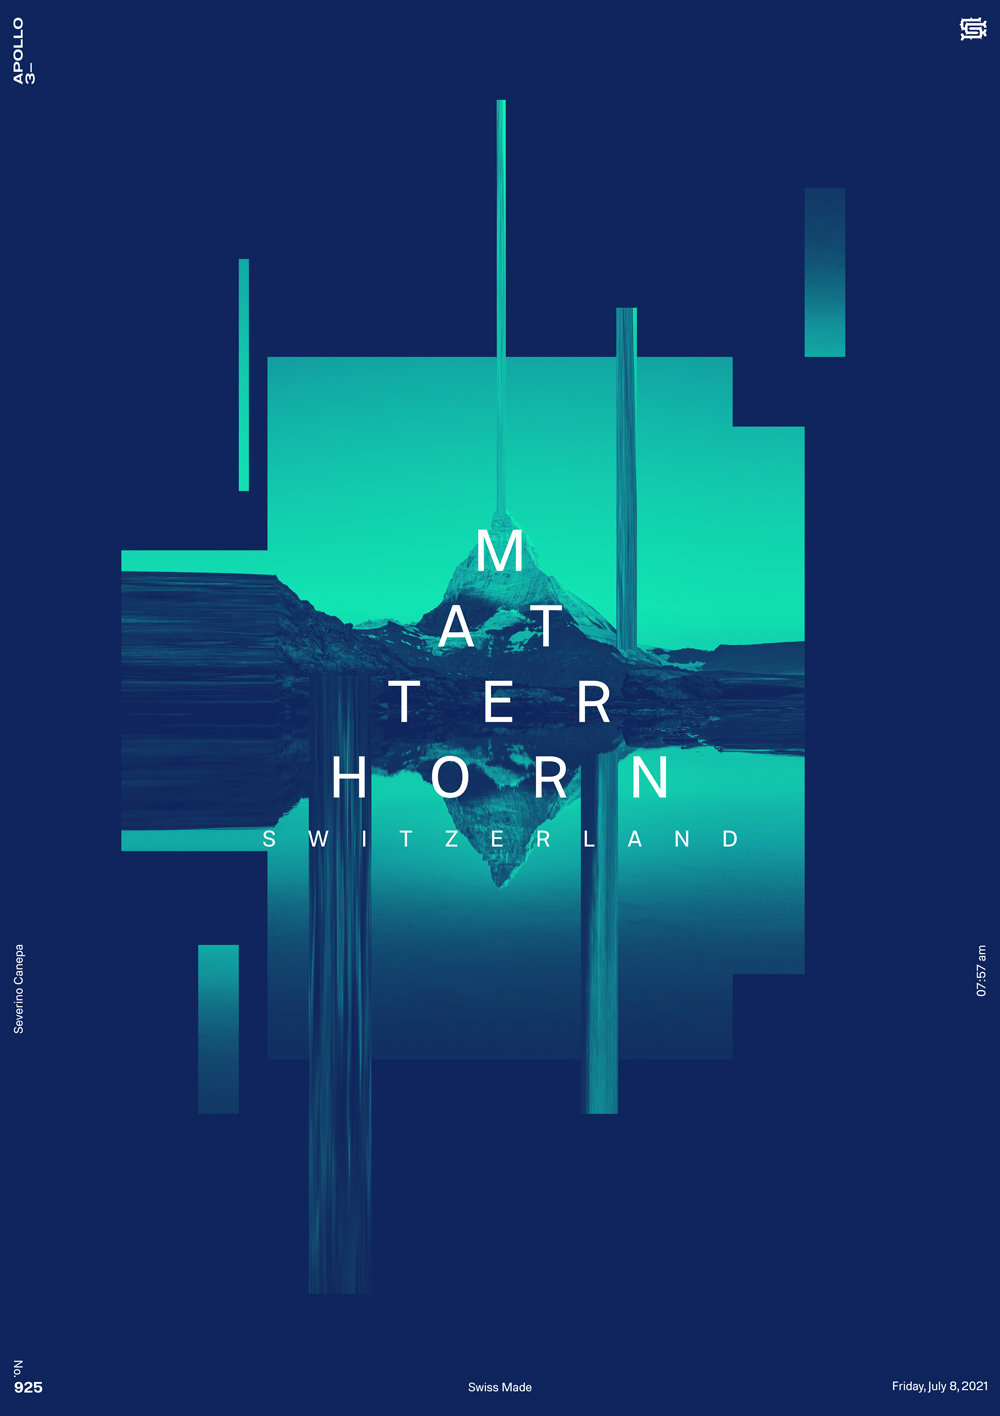 Minimalist design made with shades of blue, typography, and the photograph of the Matterhorn